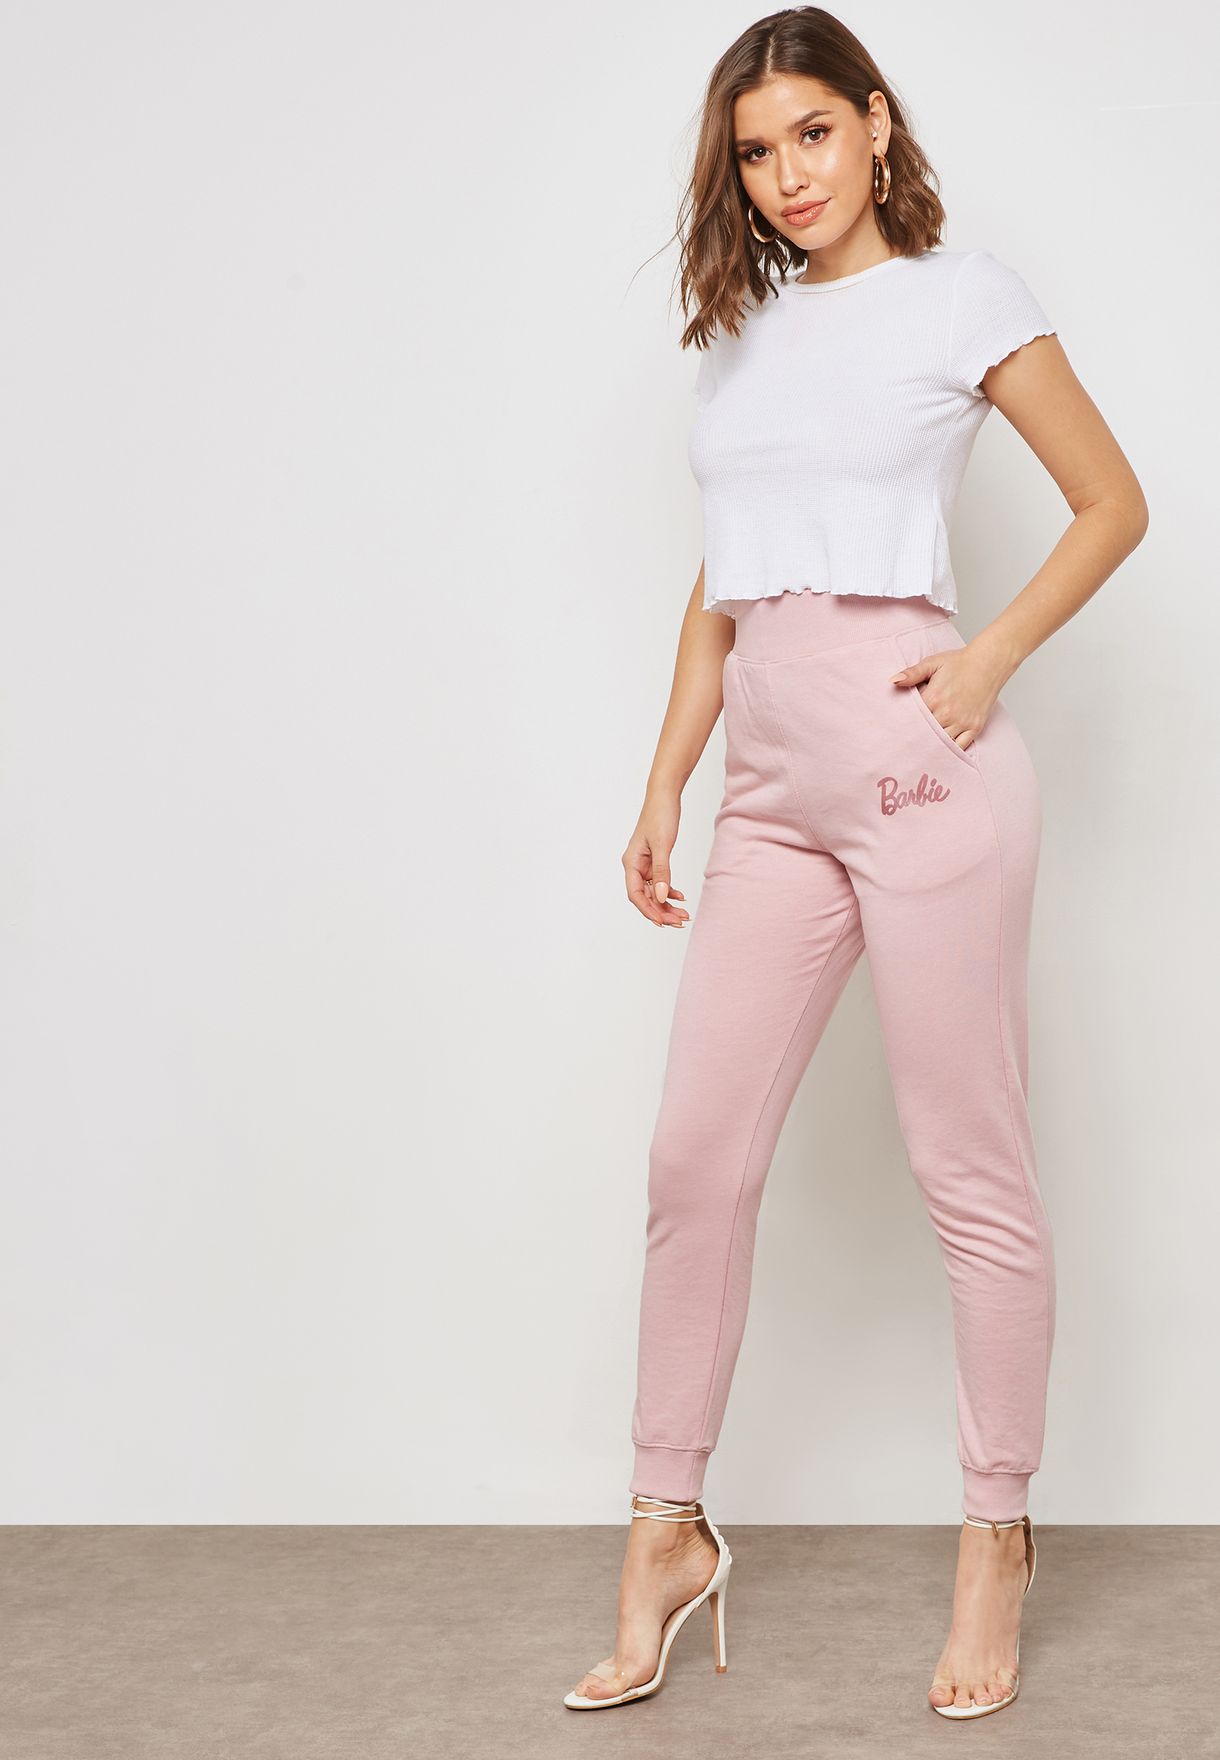 Buy Missguided Pink Barbie X Joggers For Women In Mena Worldwide